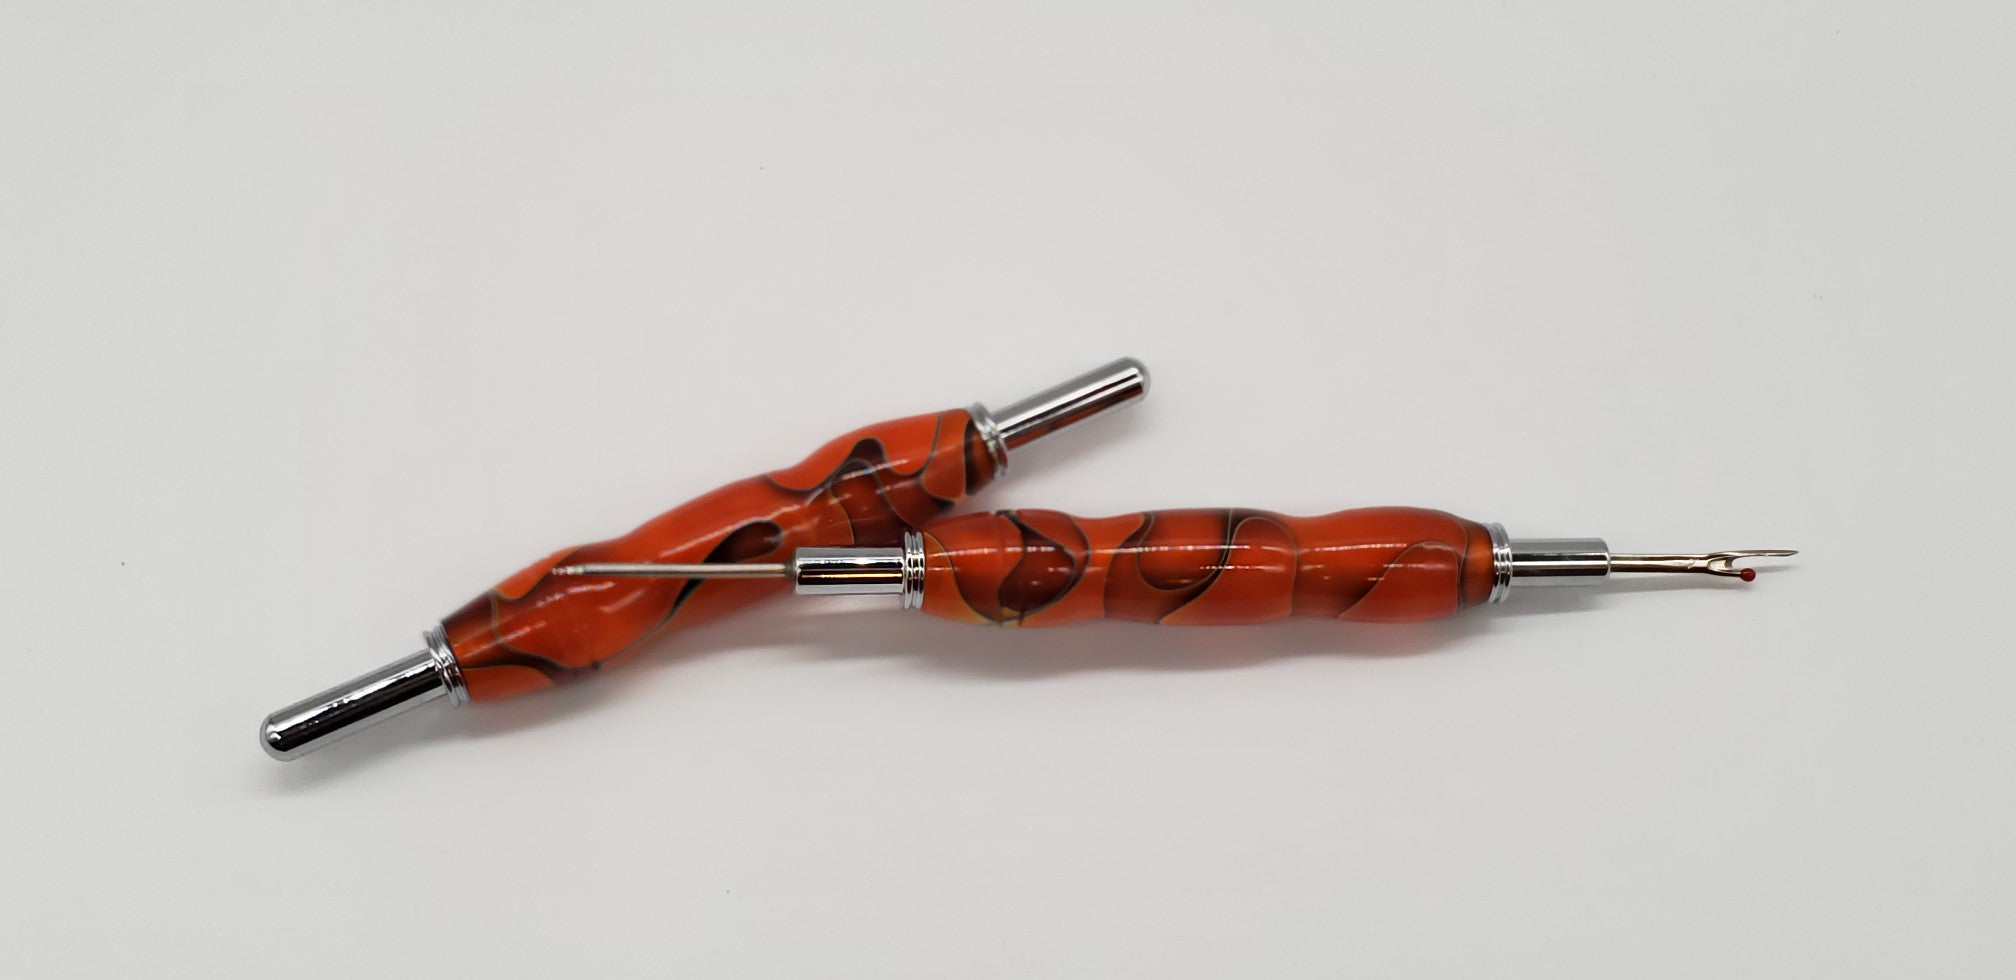 Hand Crafted Seam Ripper, Single Tool, Exotic Wood Body by